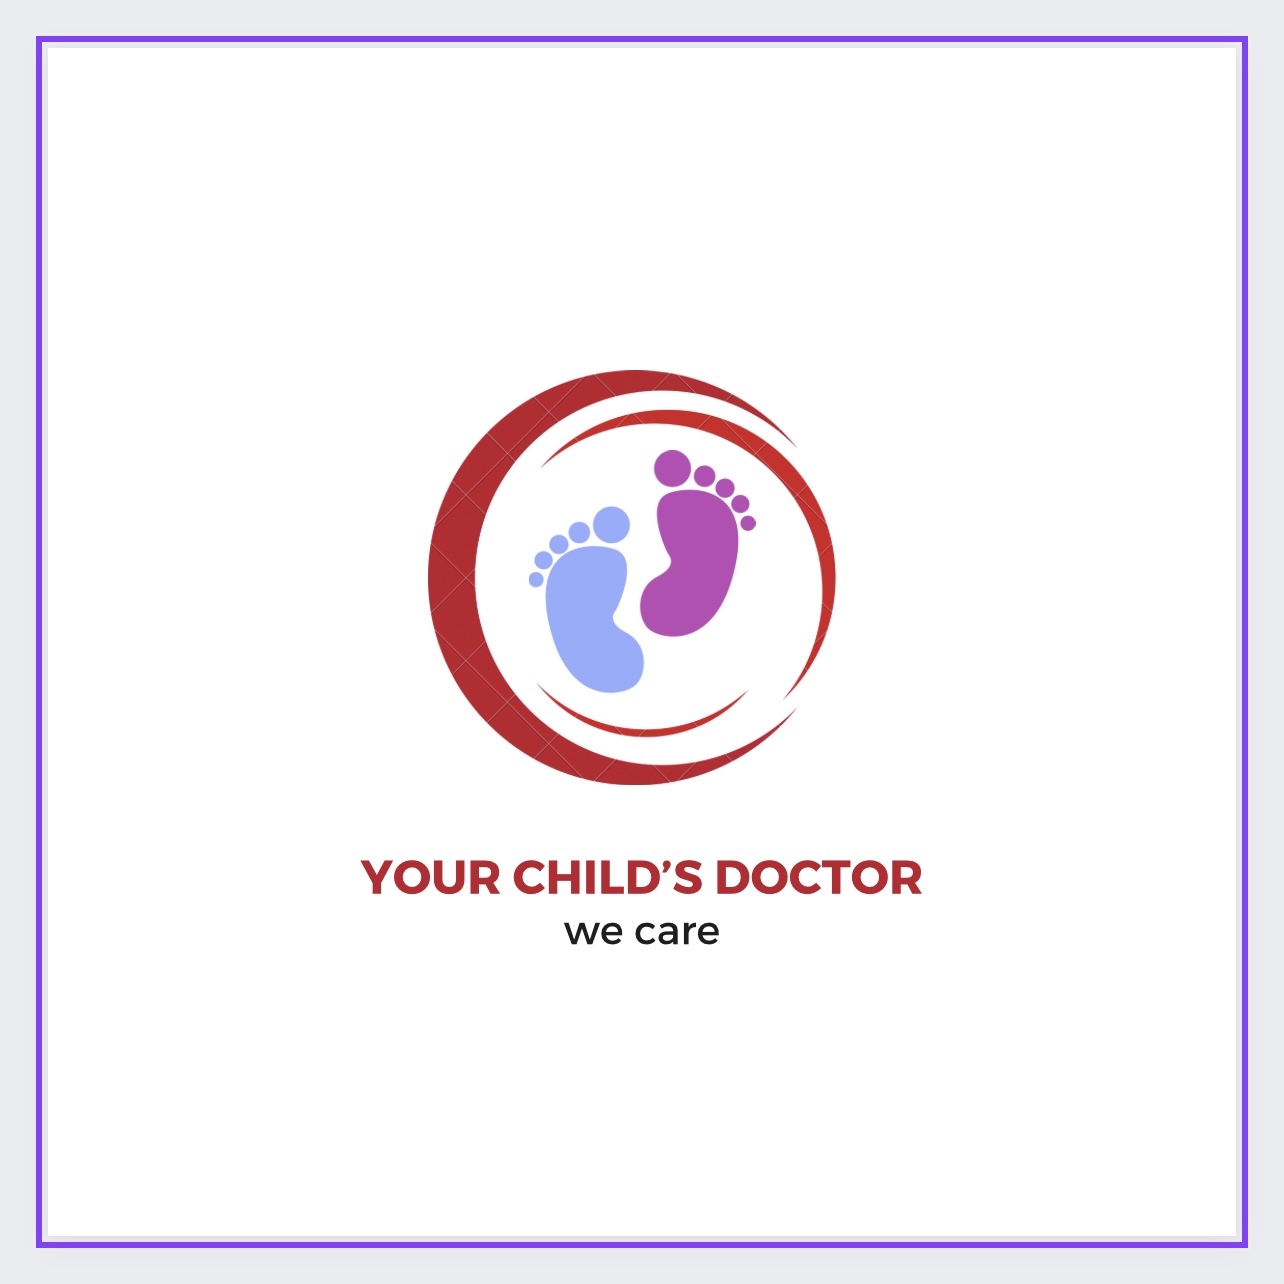 YOUR CHILD’S DOCTOR